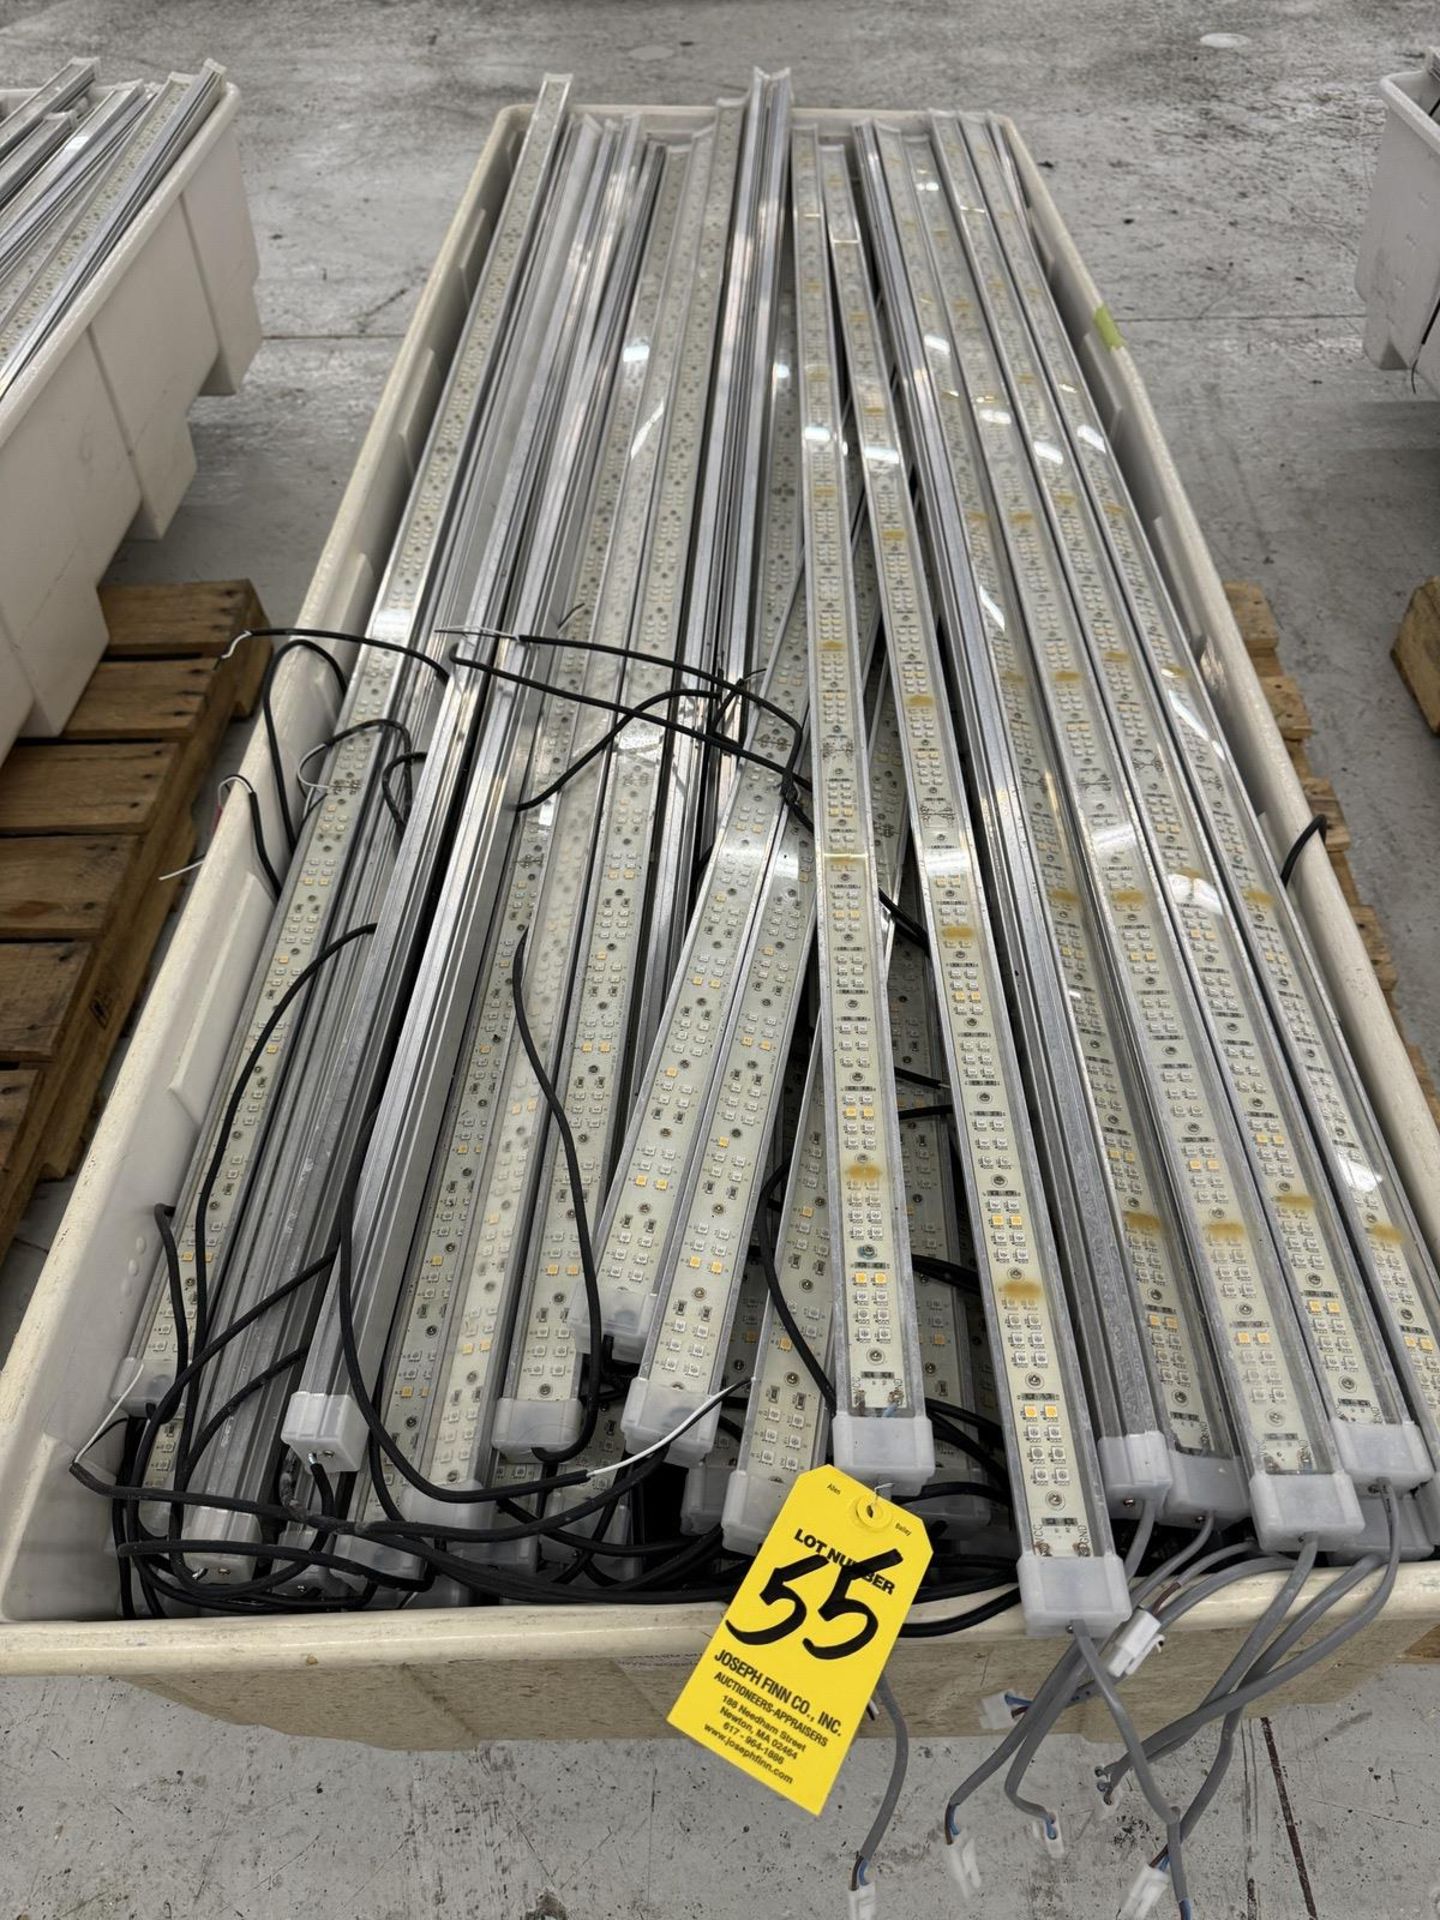 Large Quantity of Grow Lights in Bin, 77" Long, Hardwired Electrical Connections